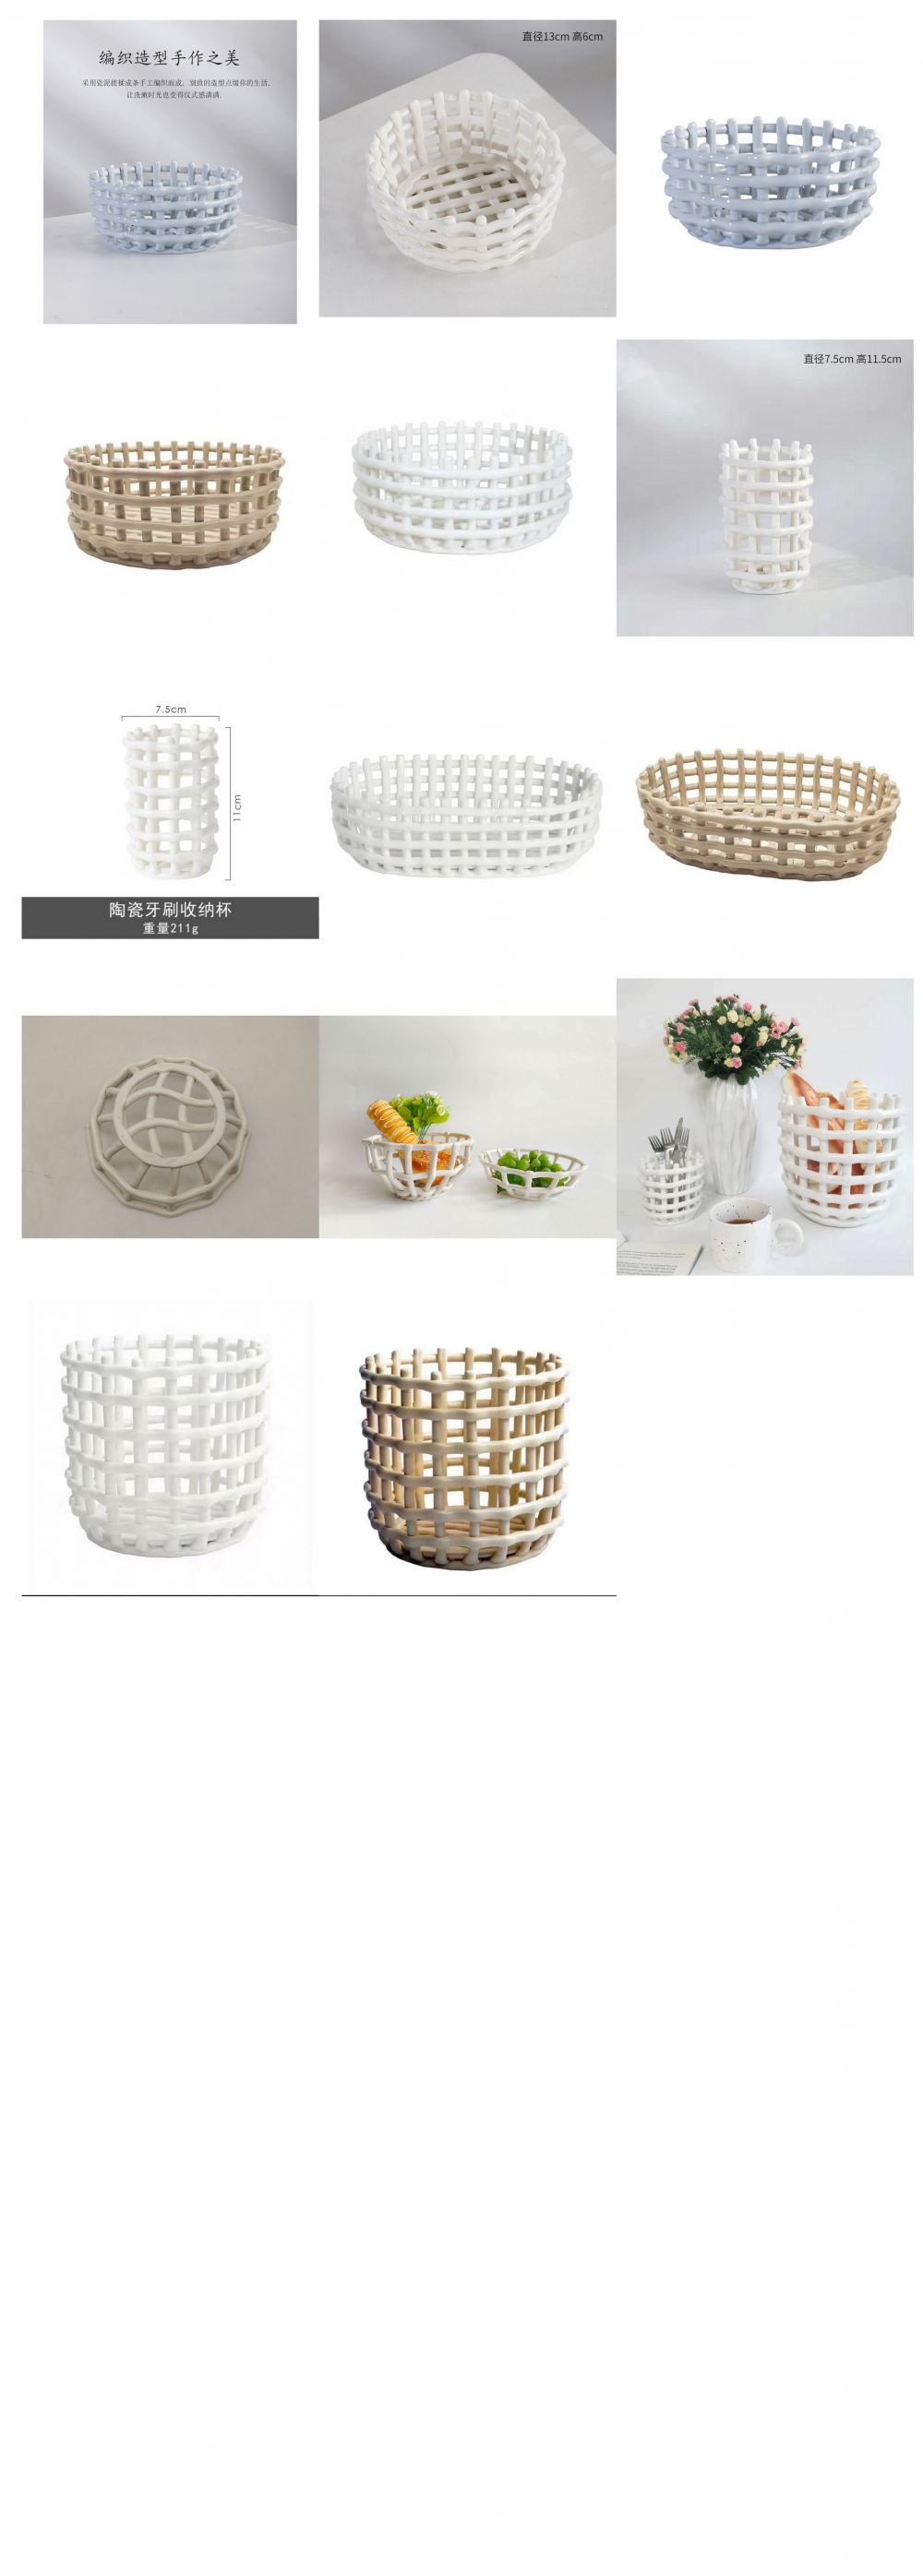 Handmade Custom Designed Fruit and Vegetable Woven Basket Fence Collection